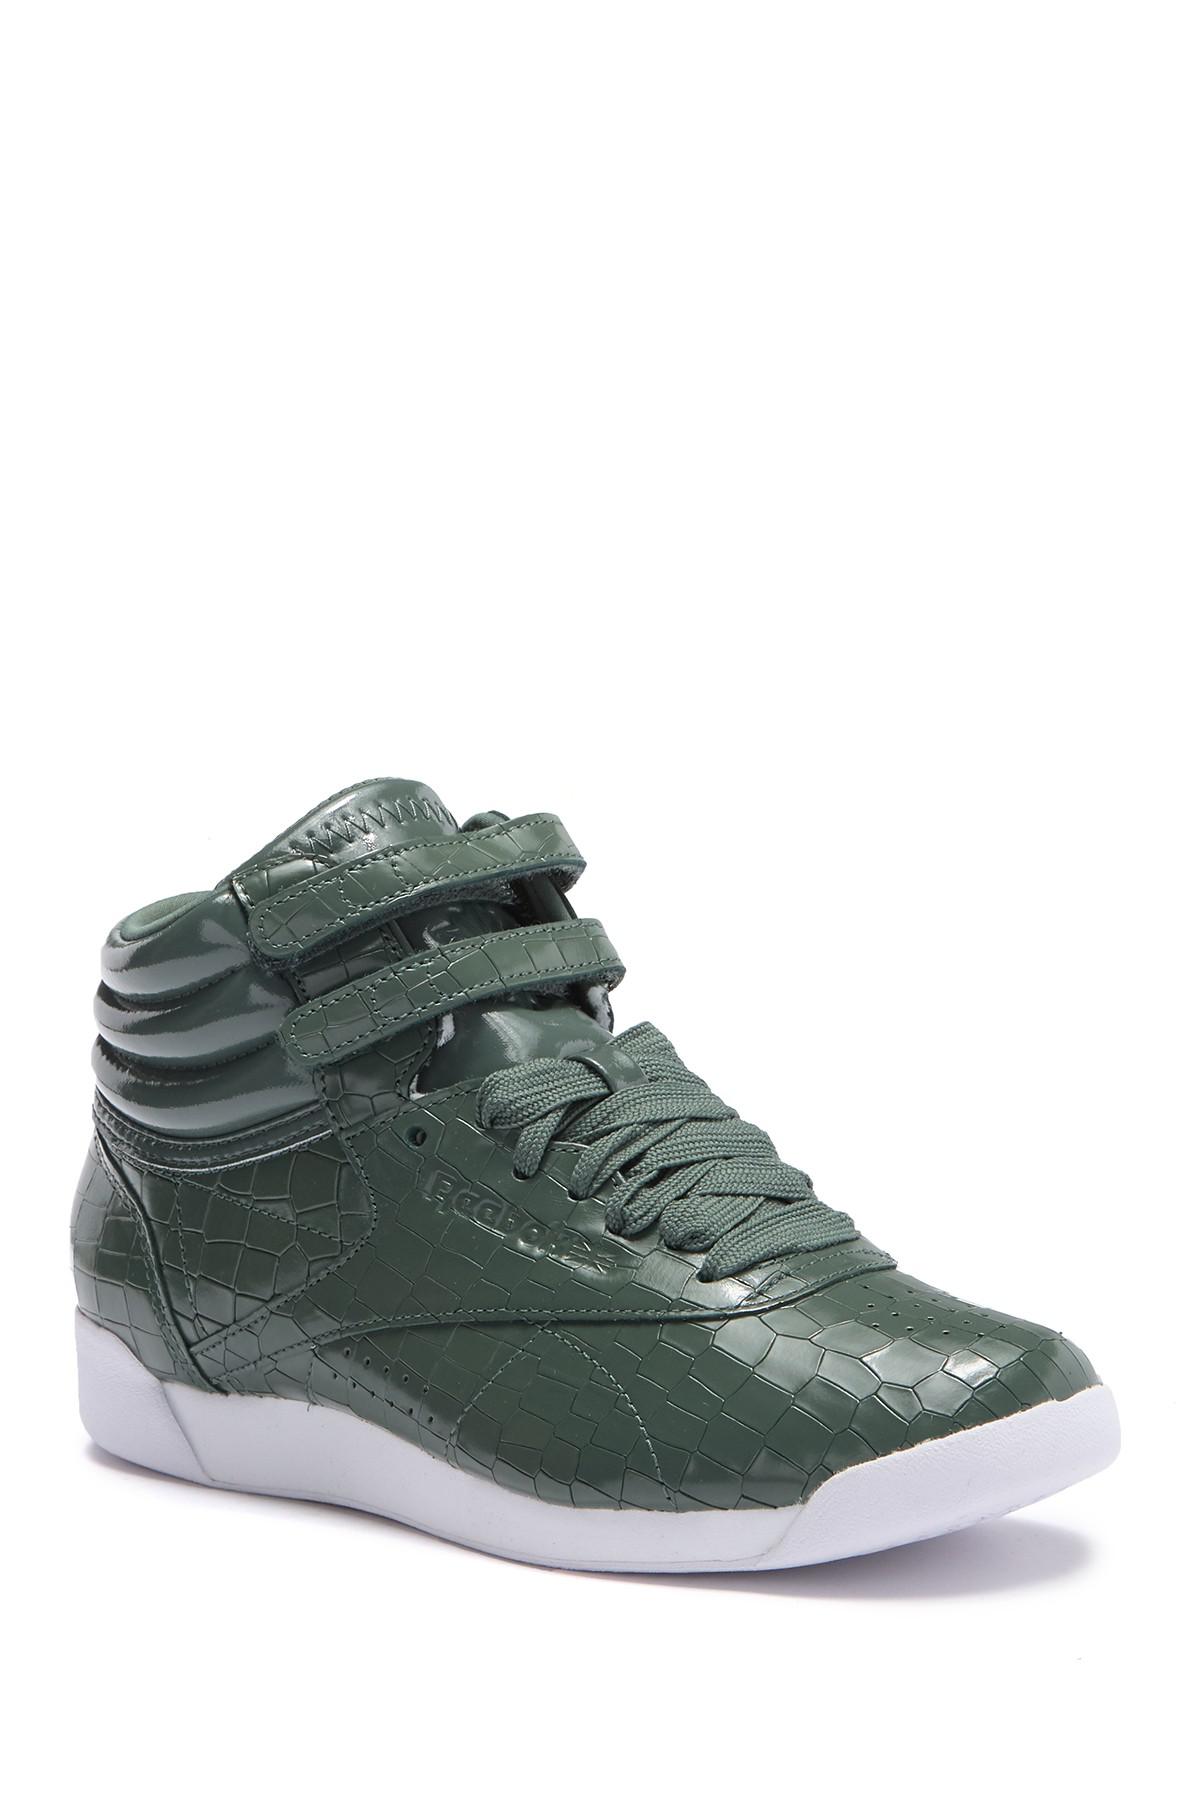 Reebok Freestyle Hi Crackle Patent Leather High Top Sneaker in Green | Lyst